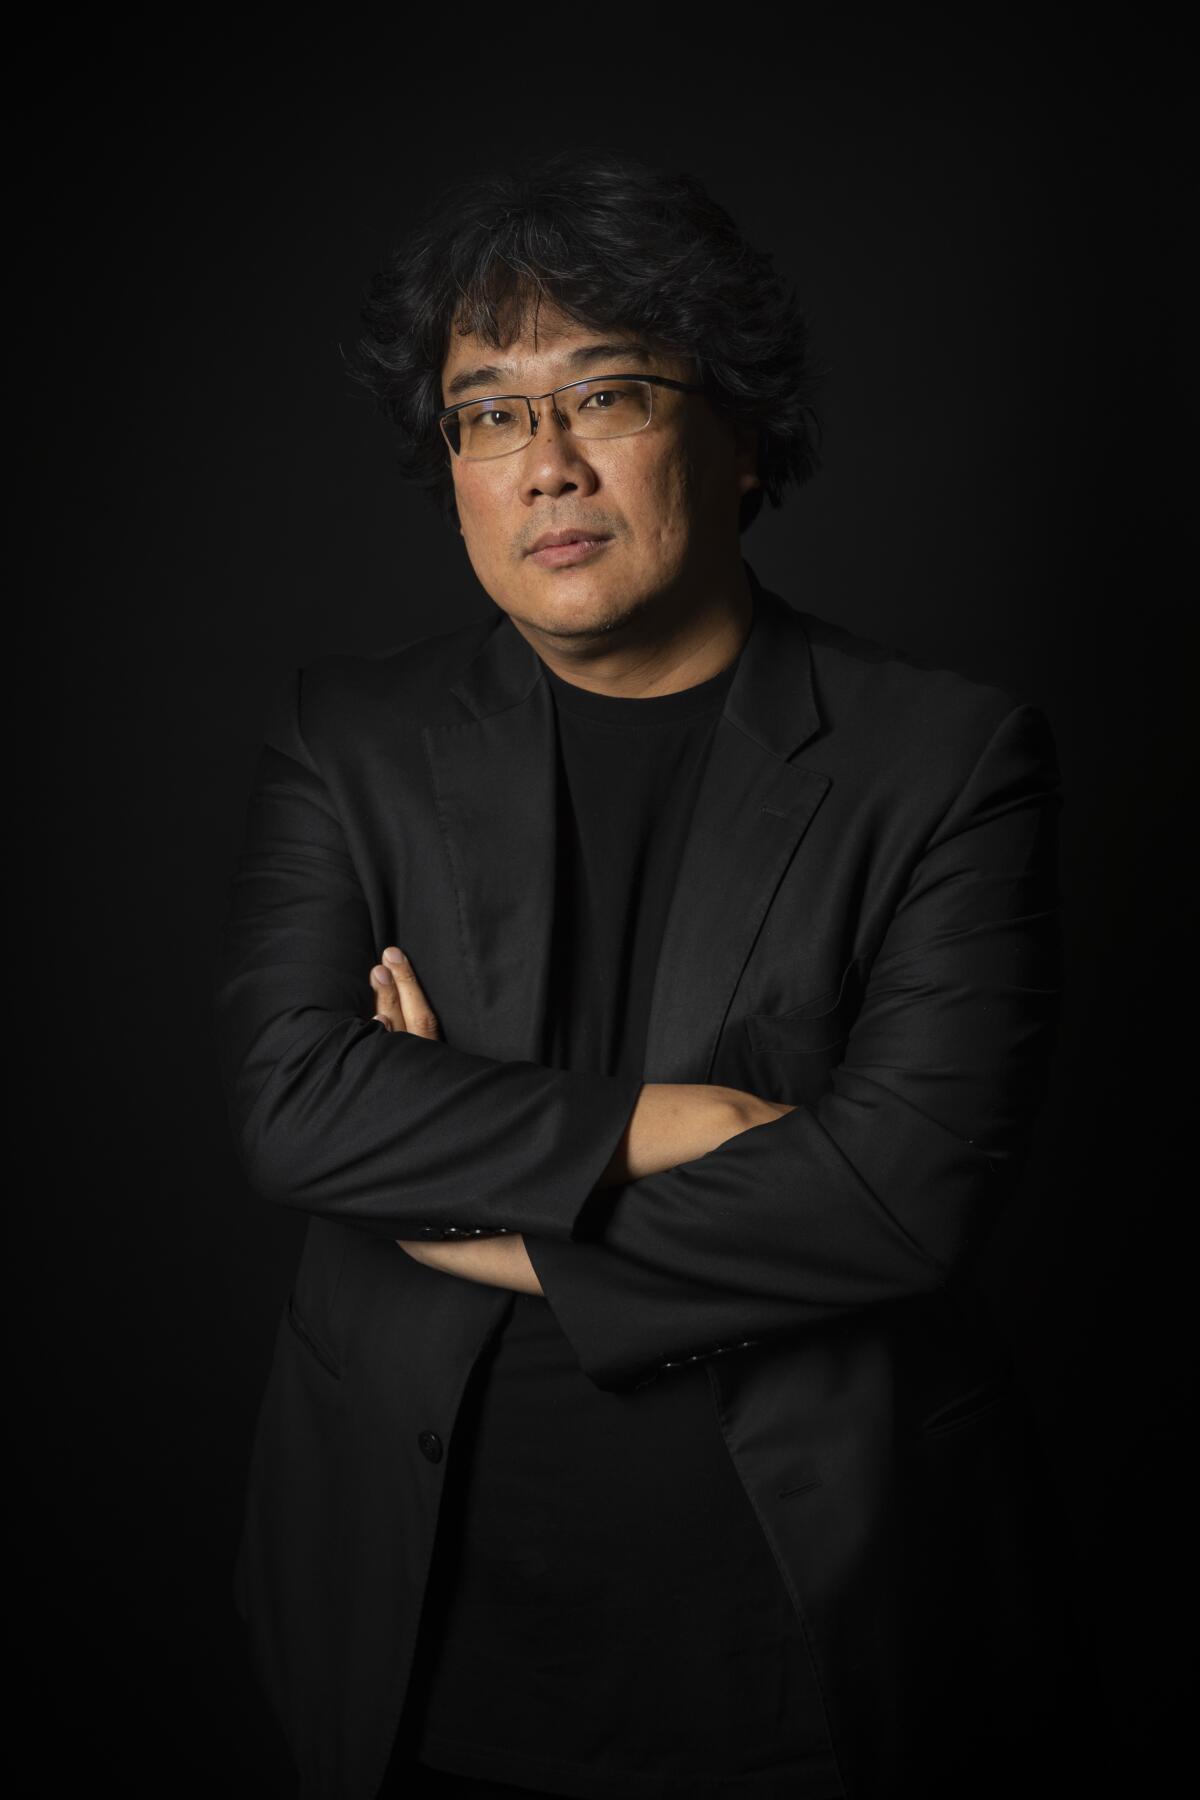 Bong Joon-ho is nominated in the director category for his film "Parasite."